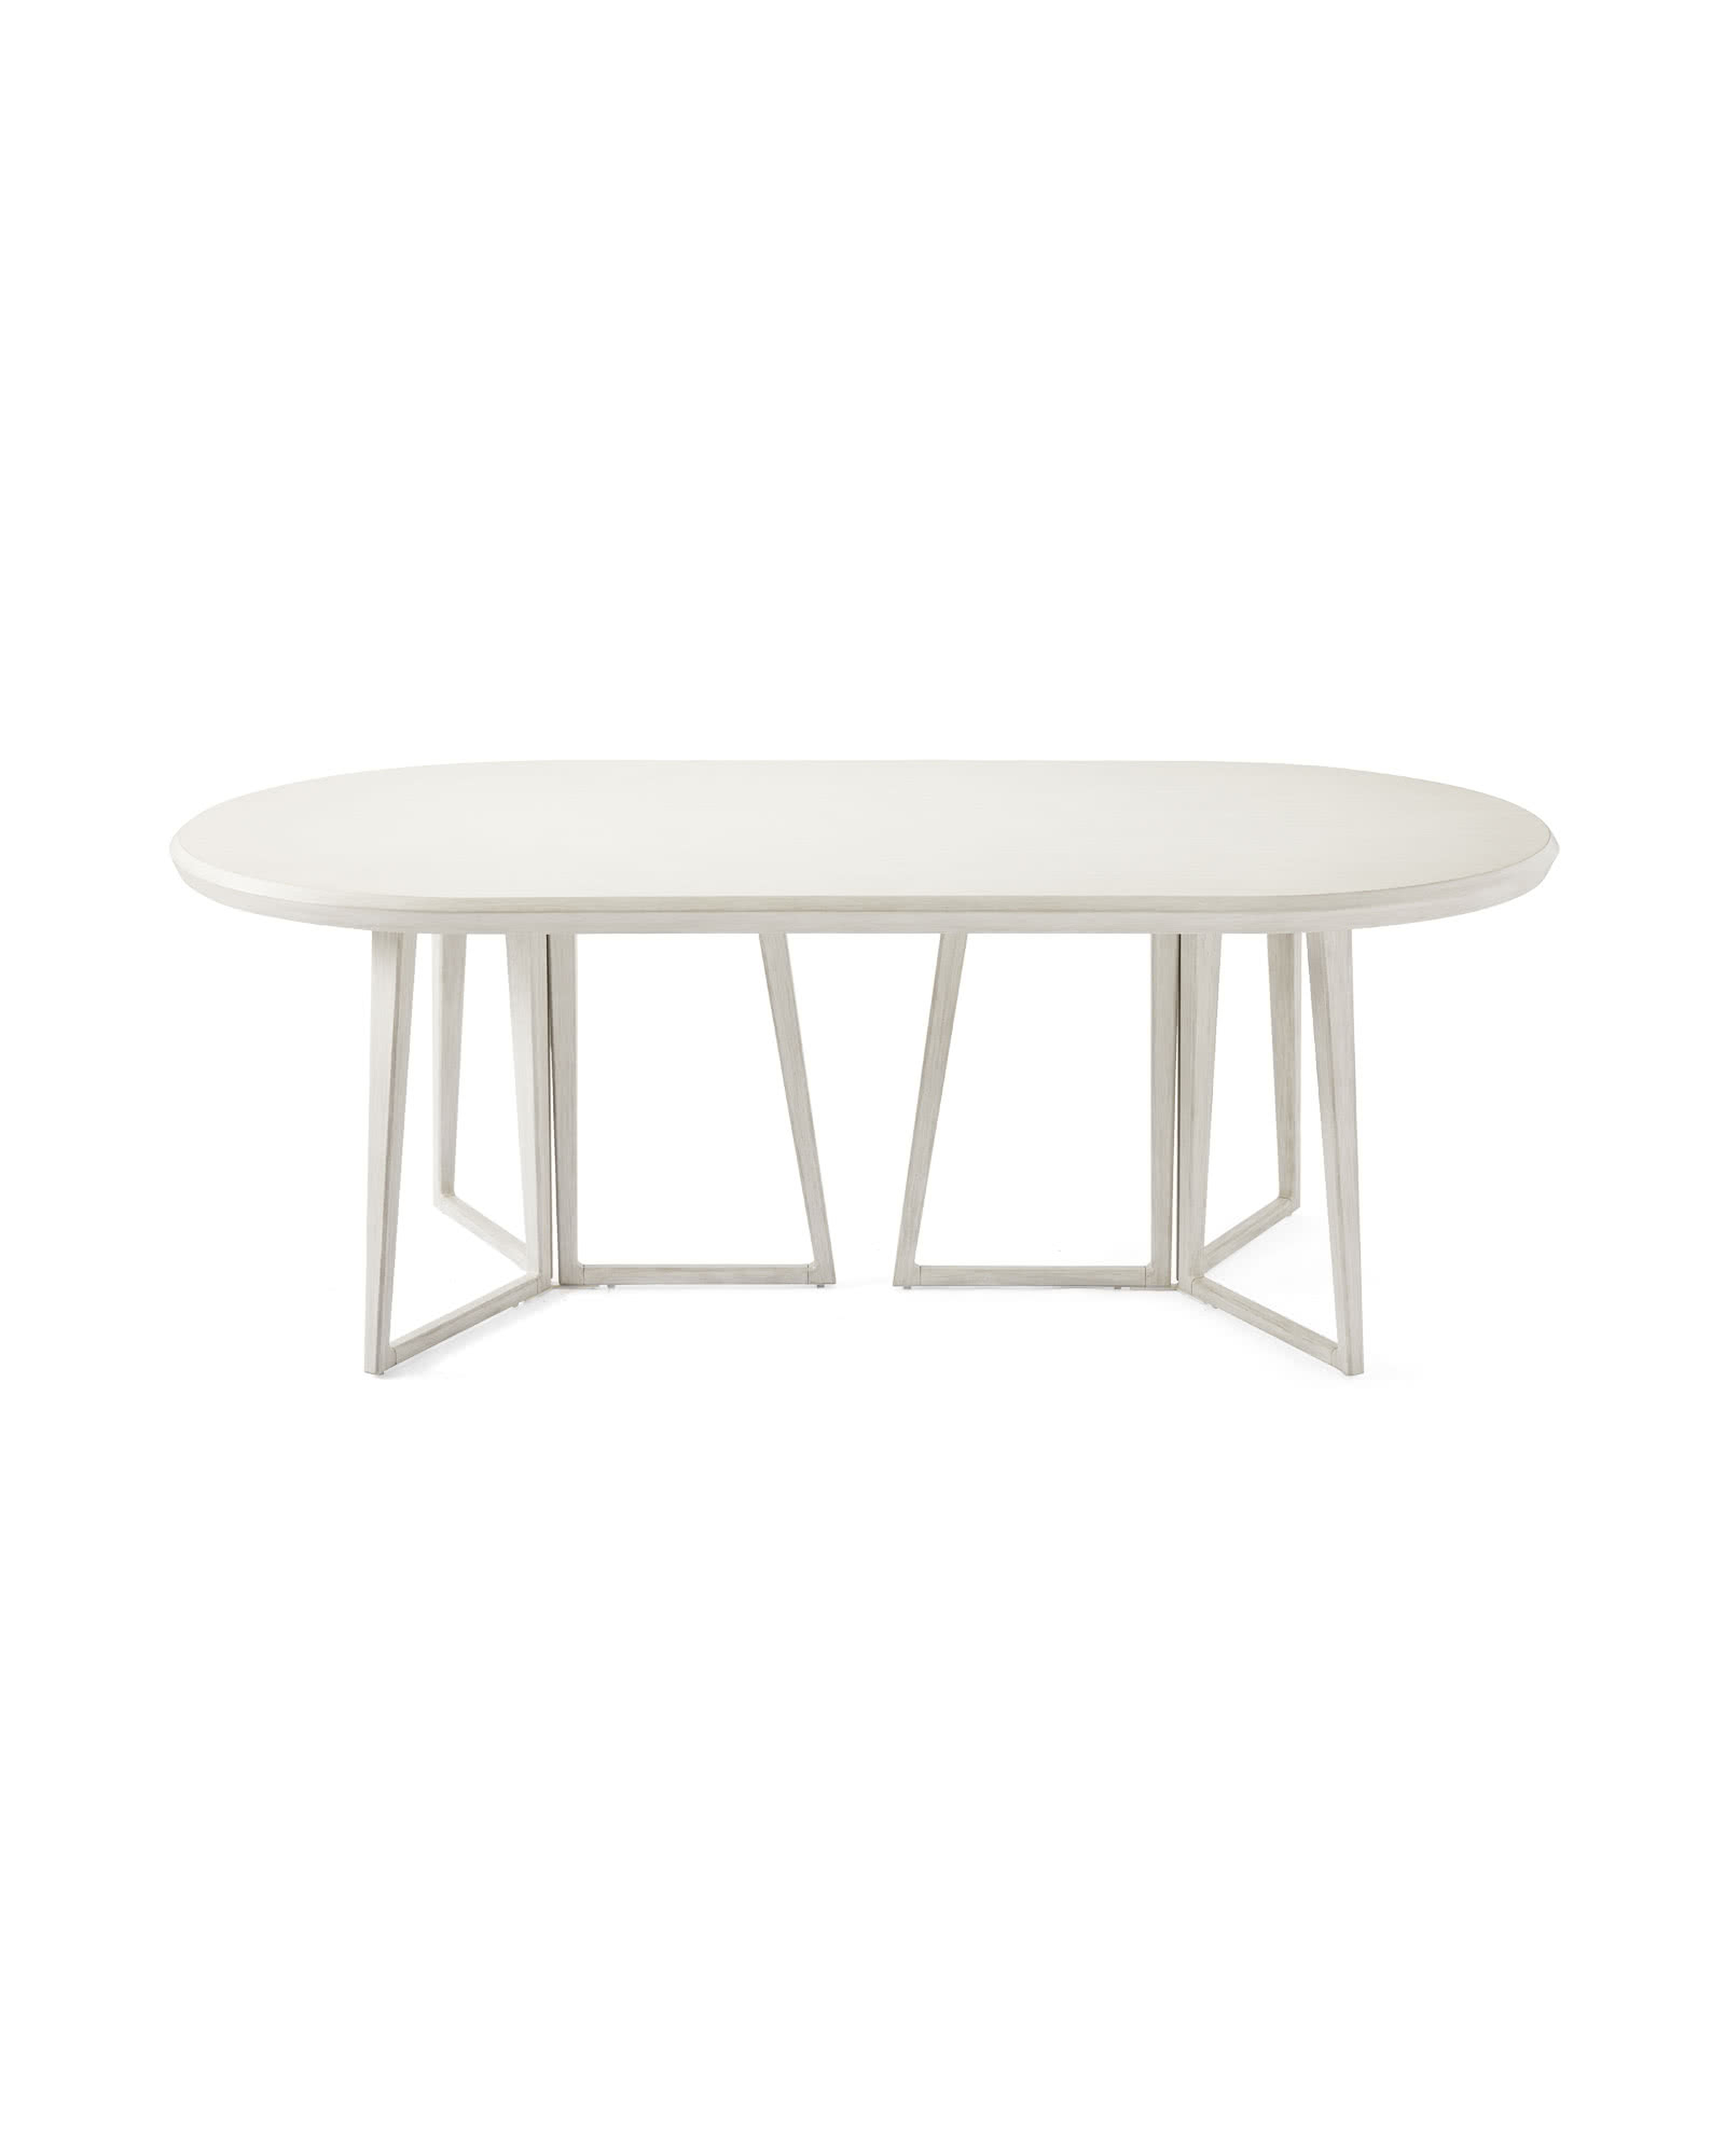 Downing Oval Dining Table -Salt Spray - Serena and Lily